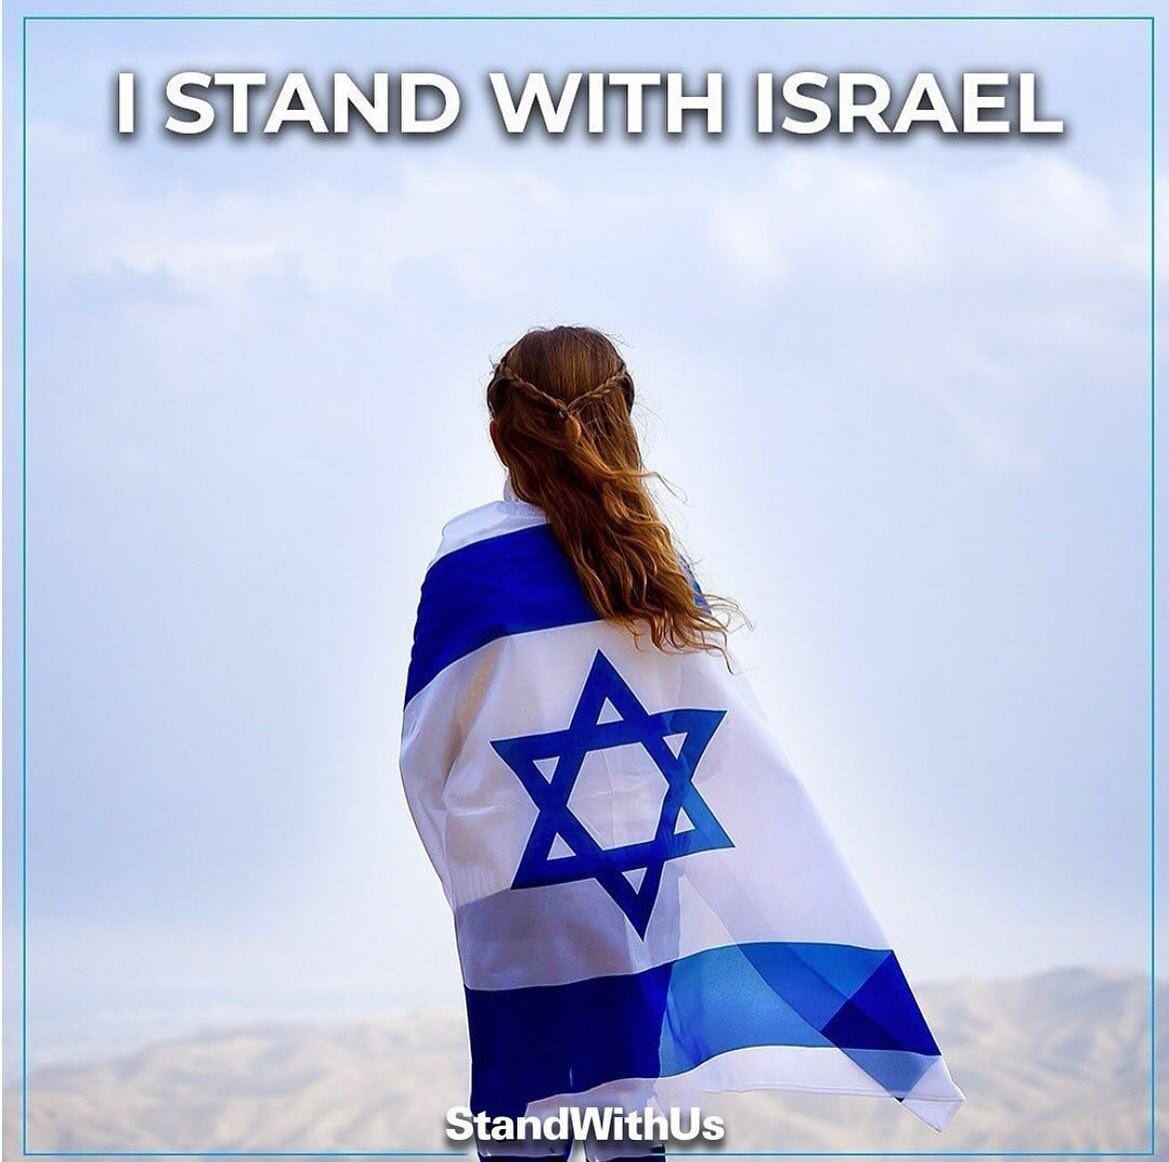 I #standwithisrael 🇮🇱 and am PRAYING for the safe return of the innocent kidnapped victims 🙏 🙏🙏 and for the safety of the 🇮🇱 forces and healthcare workers. 
&rlm;עם ישראל חי